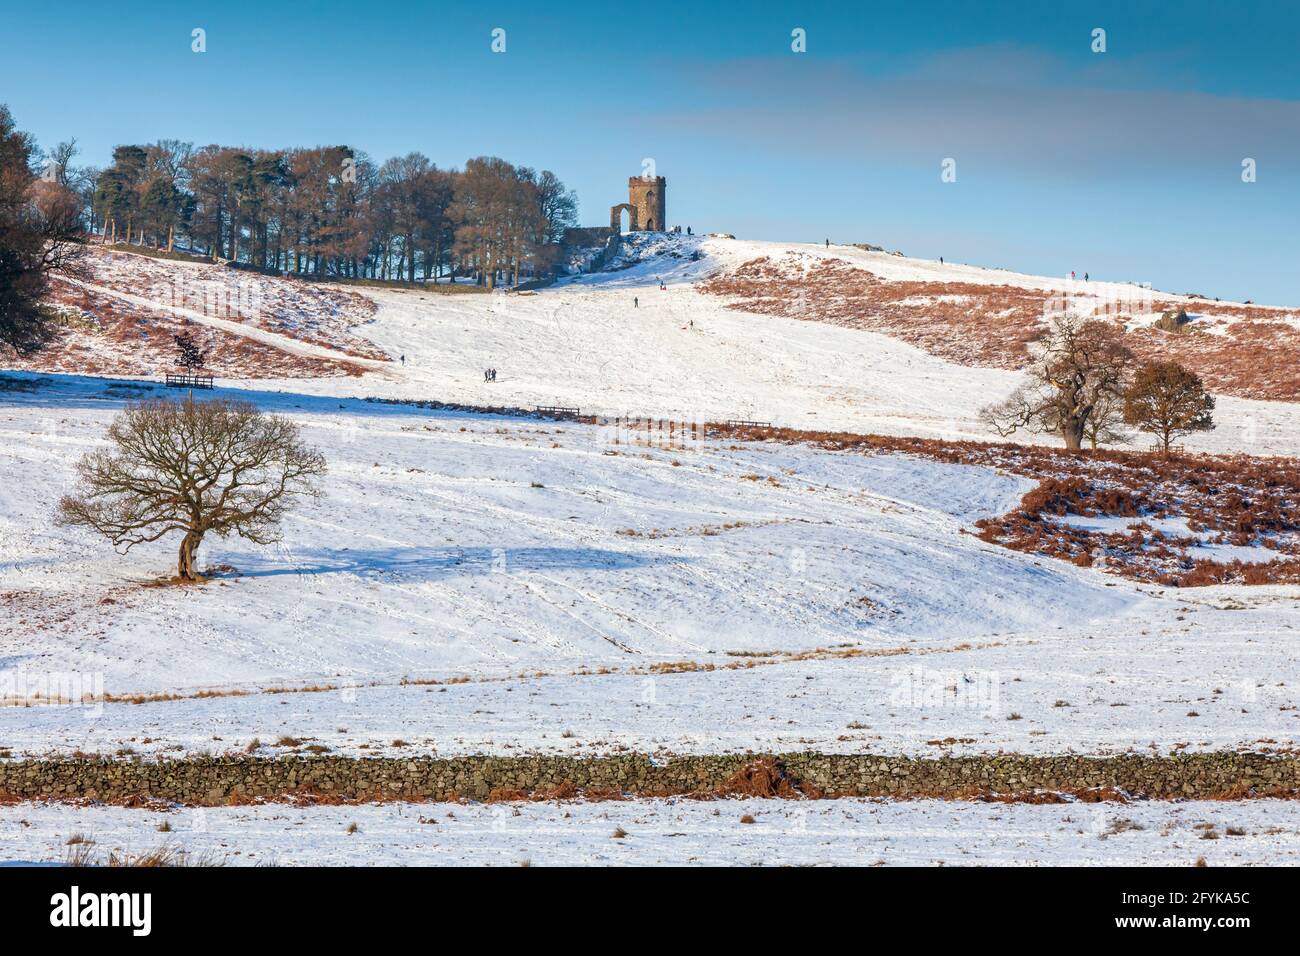 A snowy winter scene at Bradgate Park in Leicestershire, with Old John in the distance. Stock Photo